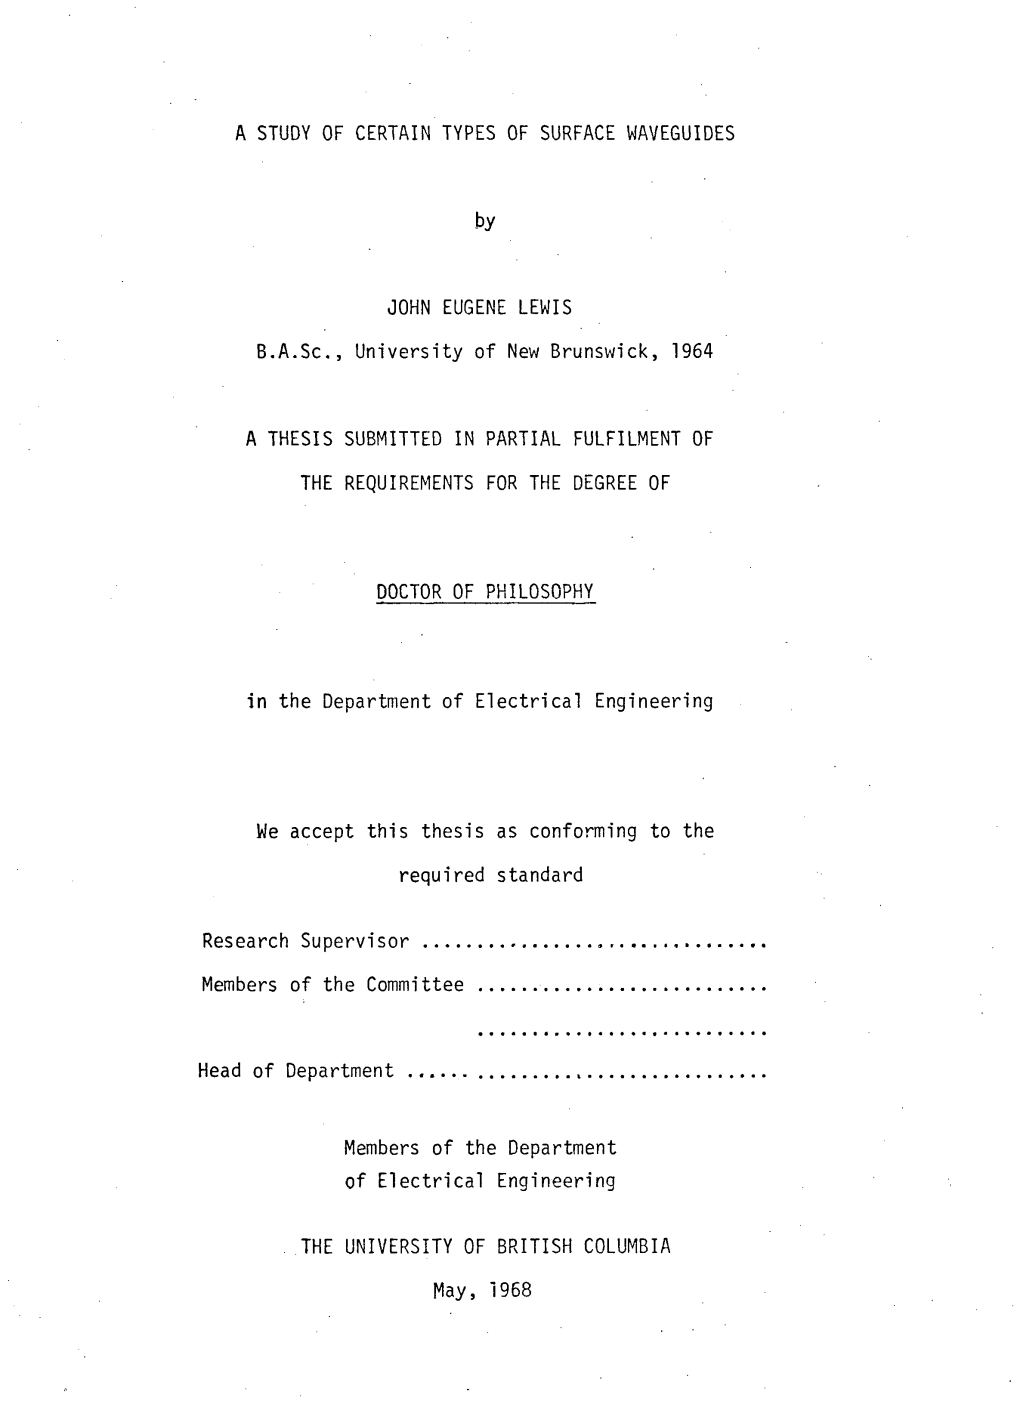 A STUDY of CERTAIN TYPES of SURFACE WAVEGUIDES by JOHN EUGENE LEWIS B.A.Sc, University of New Brunswick, 1964 a THESIS SUBMITTED